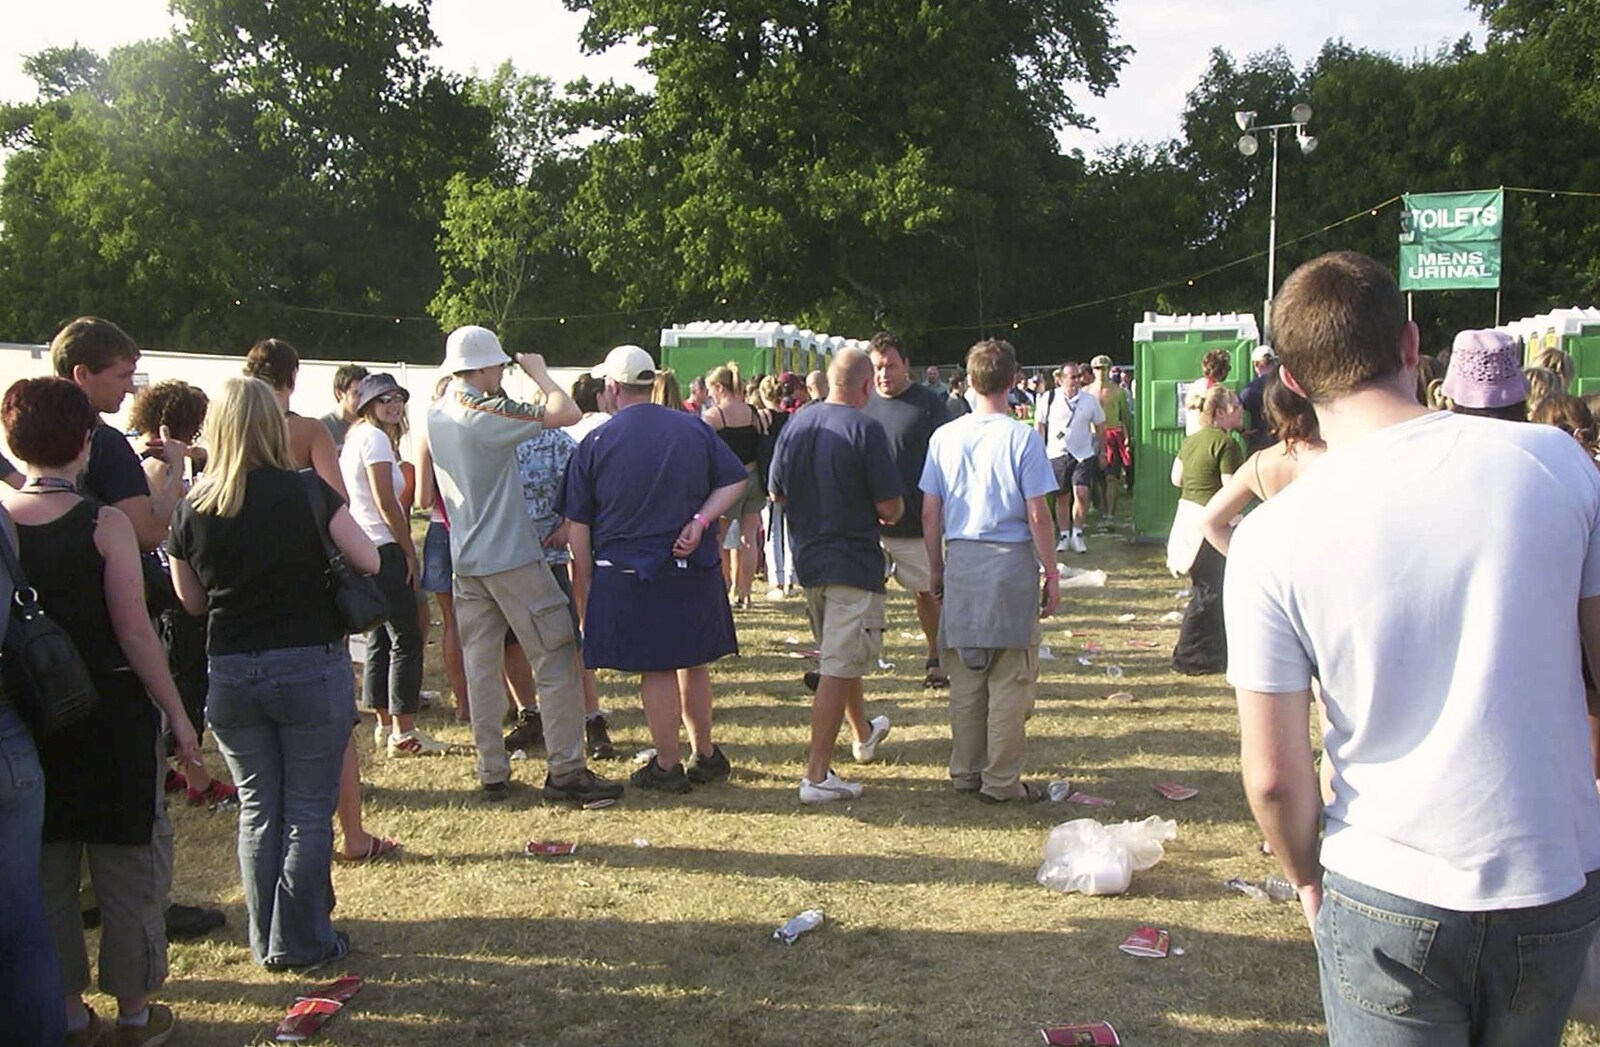 The queue for the festival bogs from V Festival 2003, Hyland's Park, Chelmsford, Essex - 16th August 2003